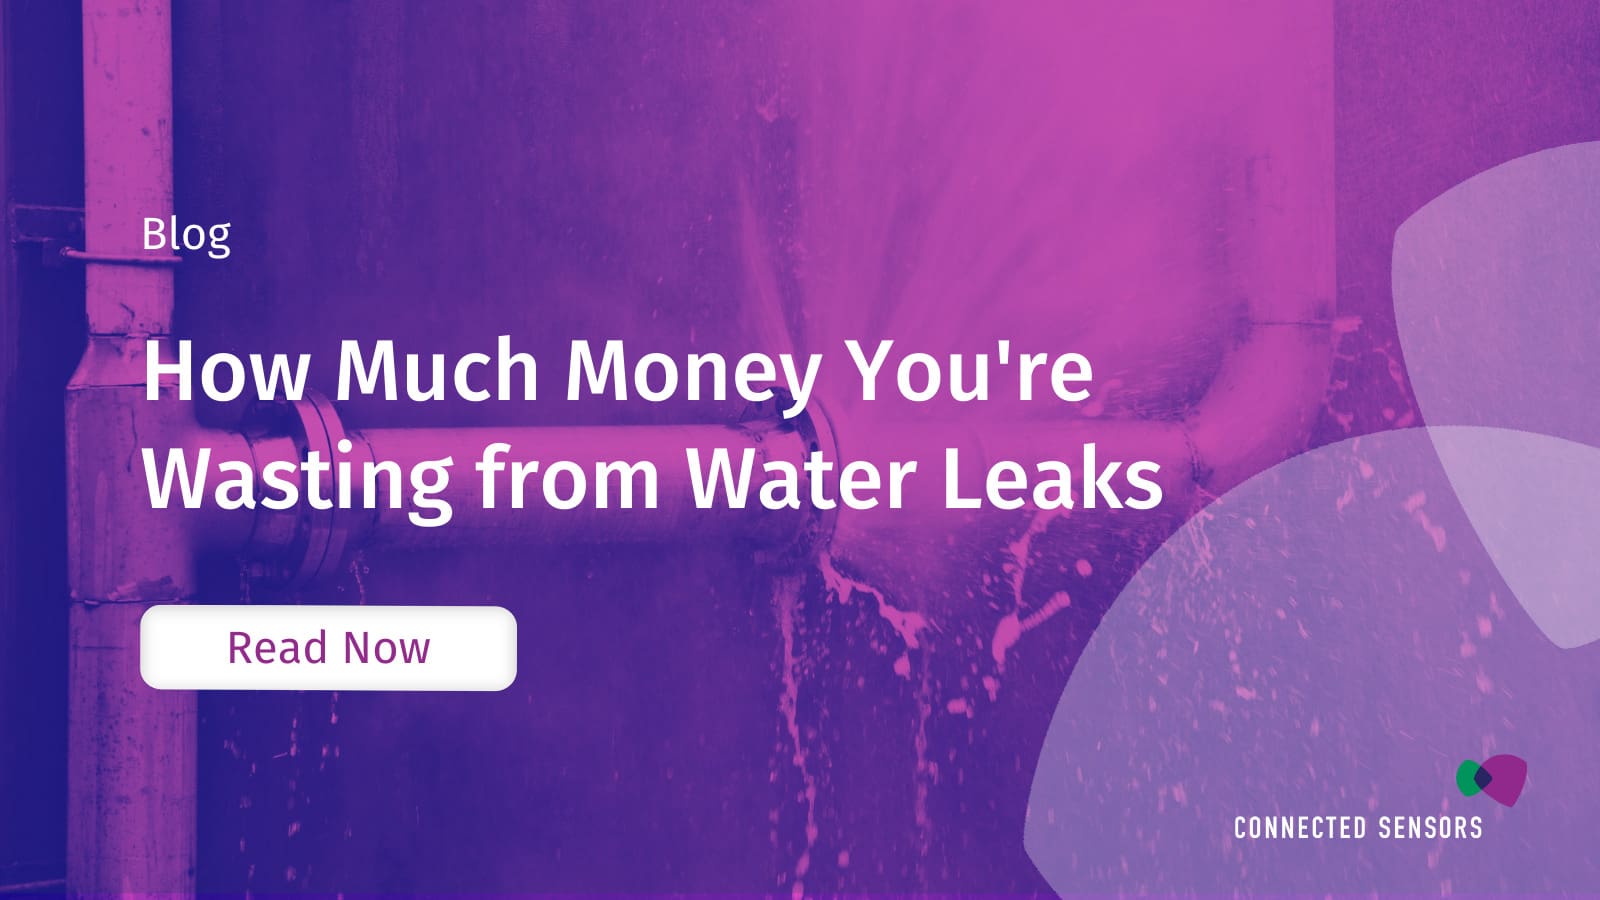 How Much Money You're Wasting from Water Leaks